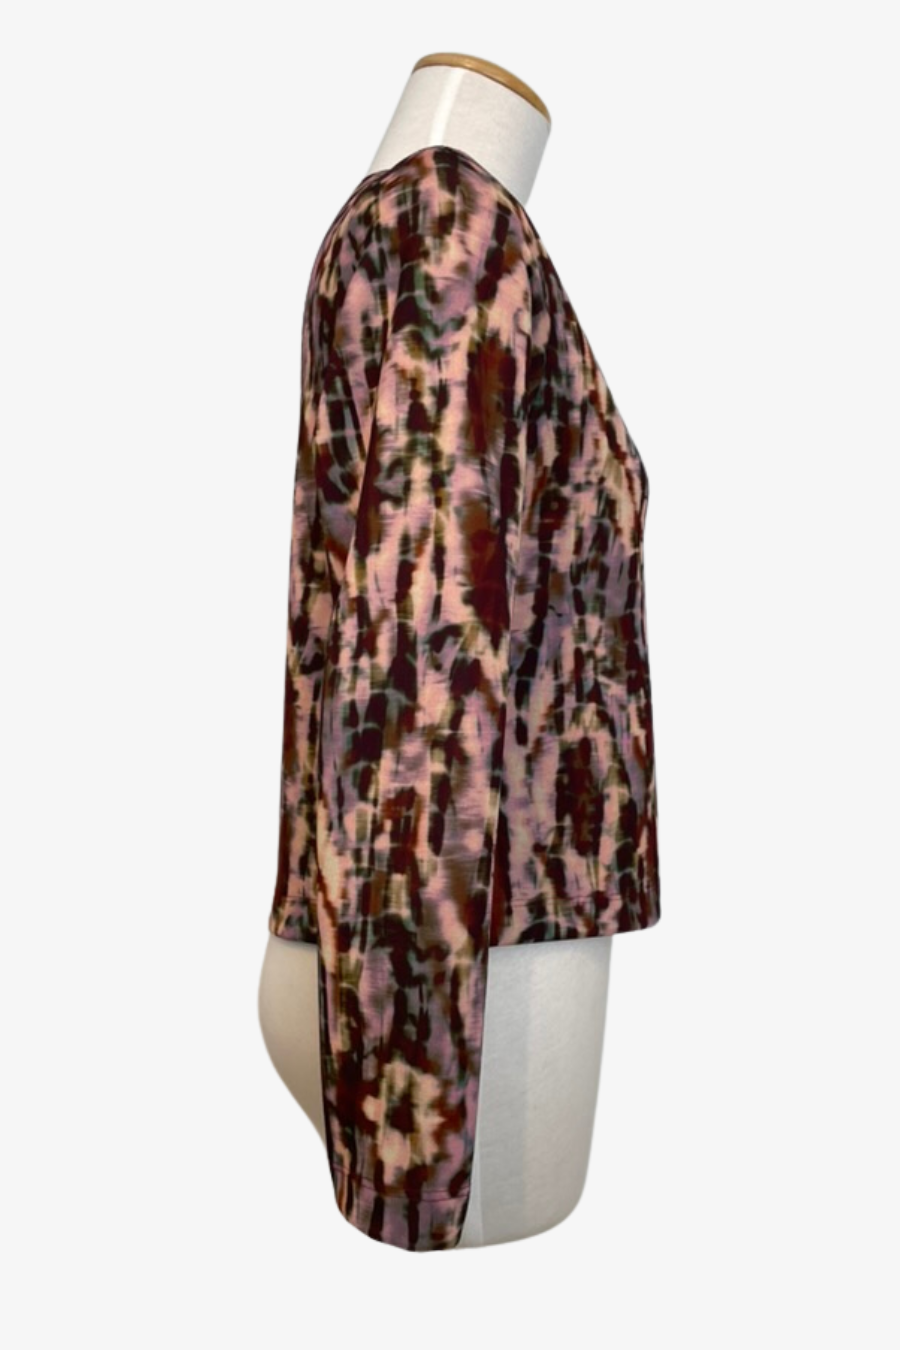 Betz Jacket in Corteccia Print Fabric ONLINE ONLY